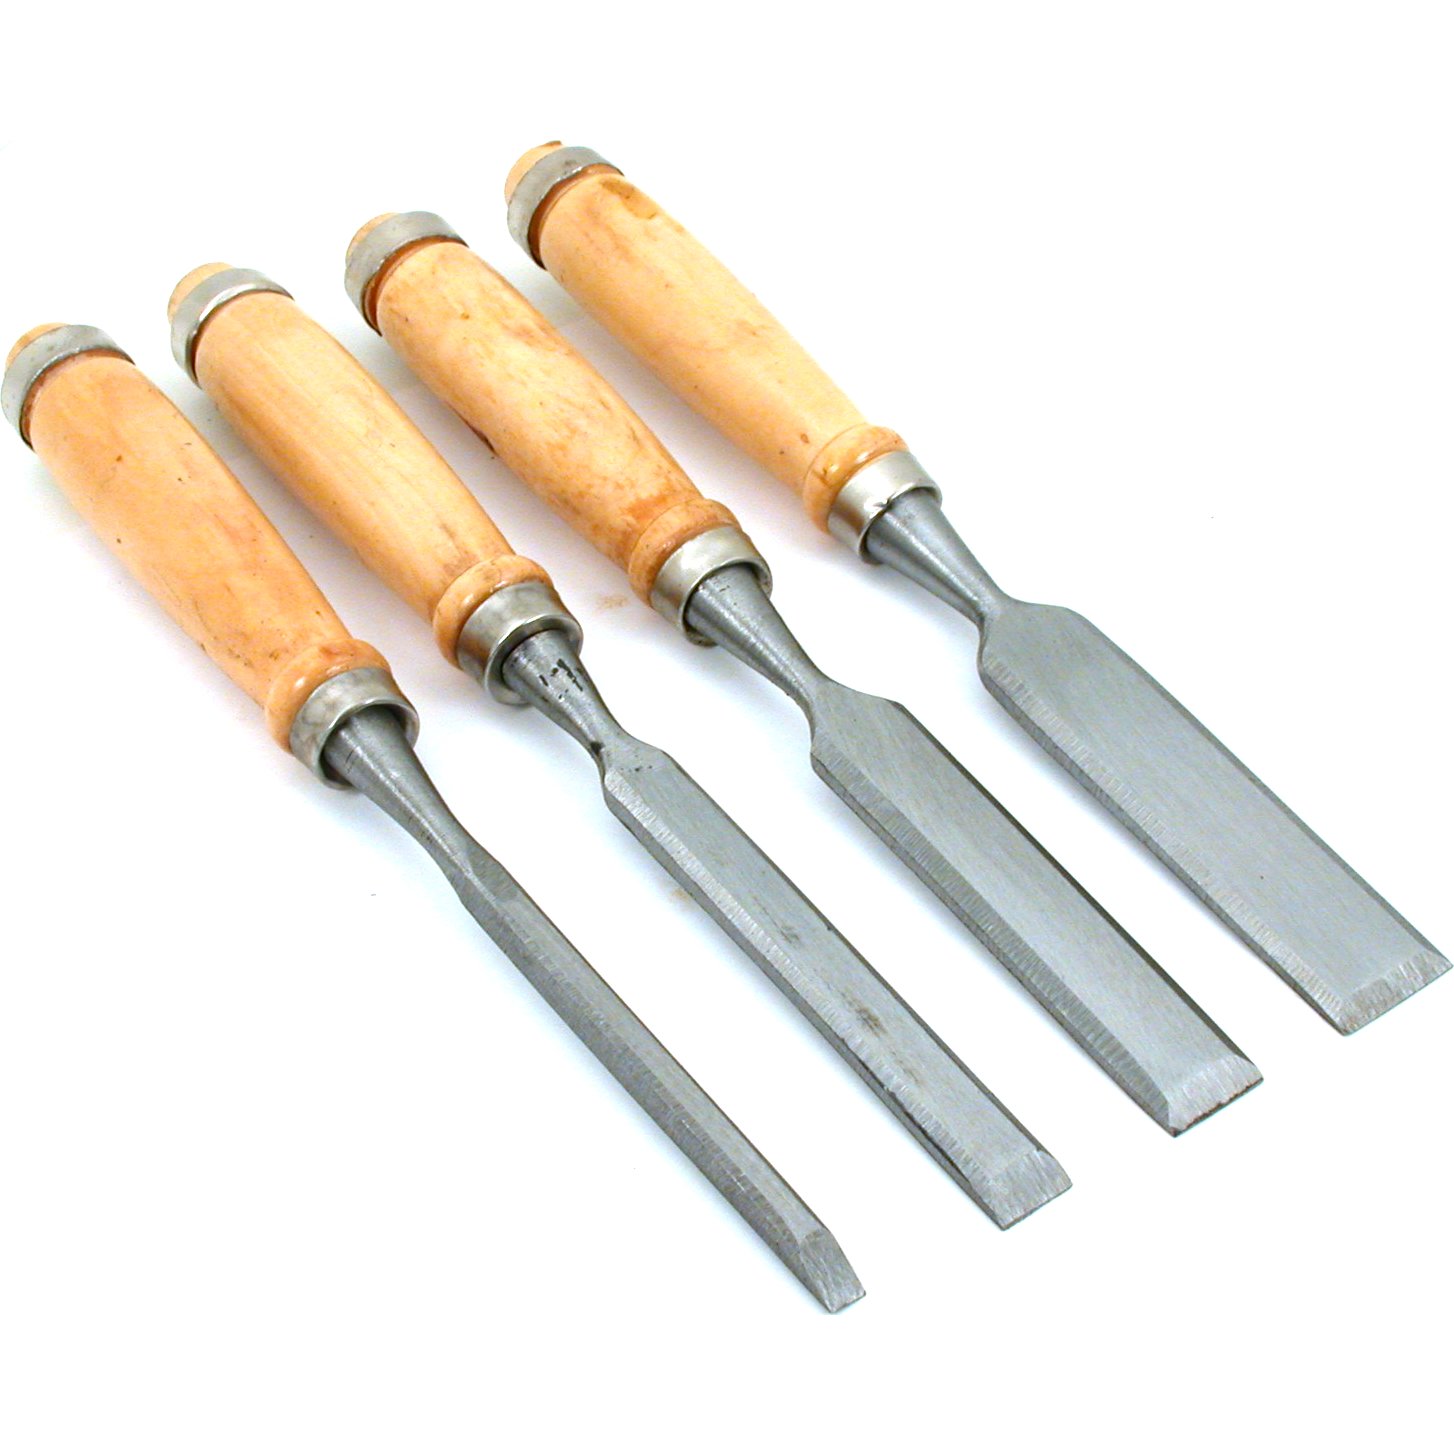 Findingking 4 Wood Carving Chisels